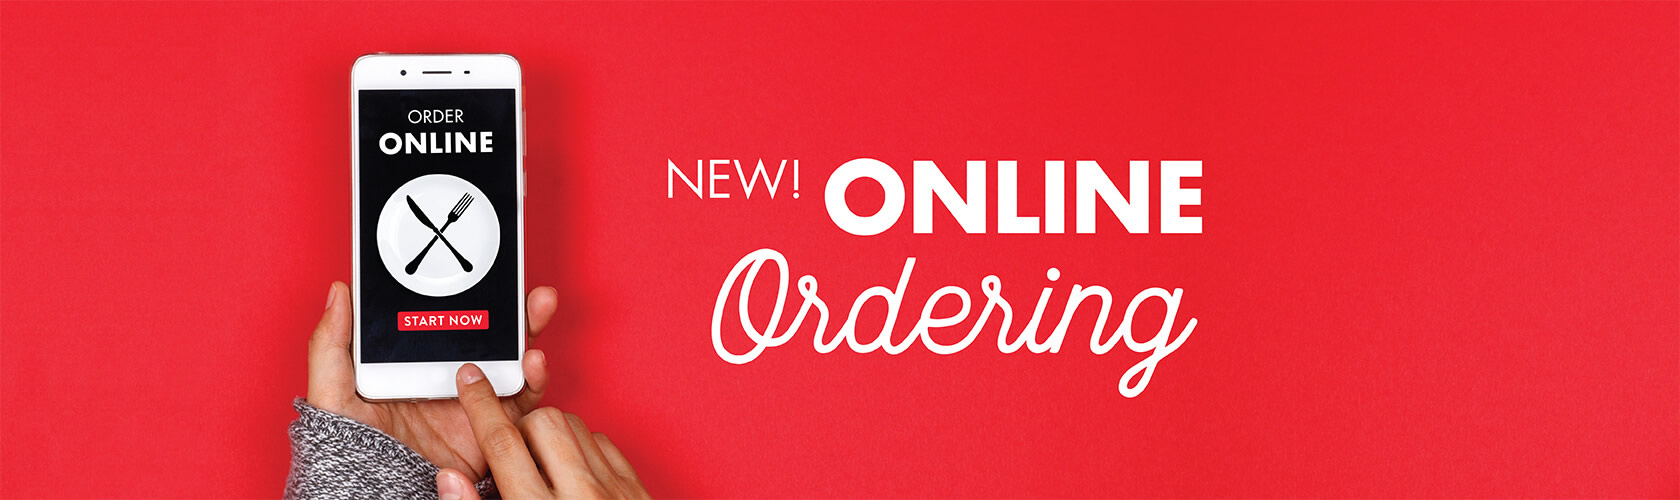 Online ordering now available!